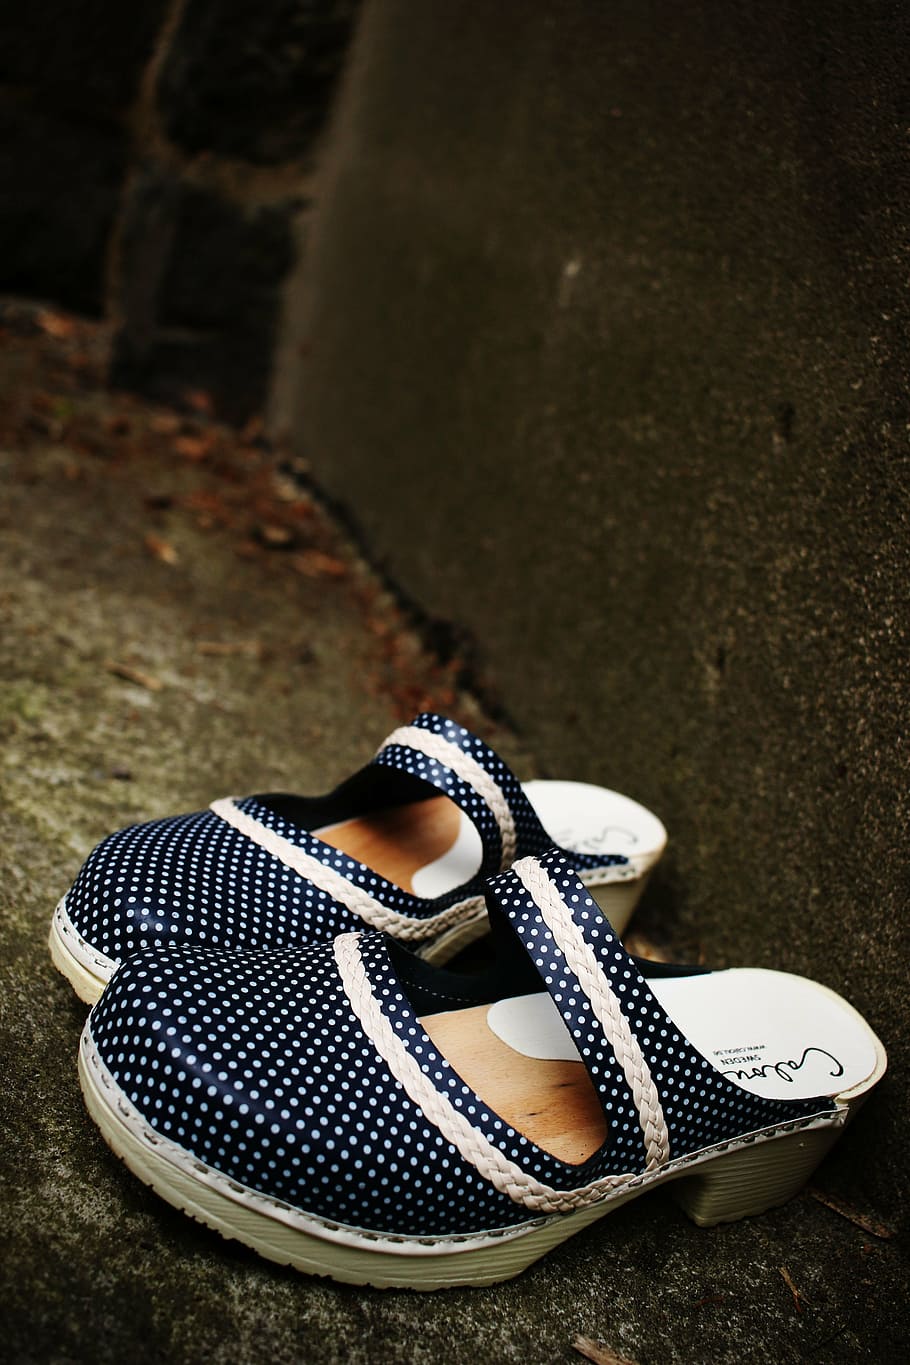 shoes, clogs, footwear, fashion, girl shoes, female, shoe, pair, still life, compatibility